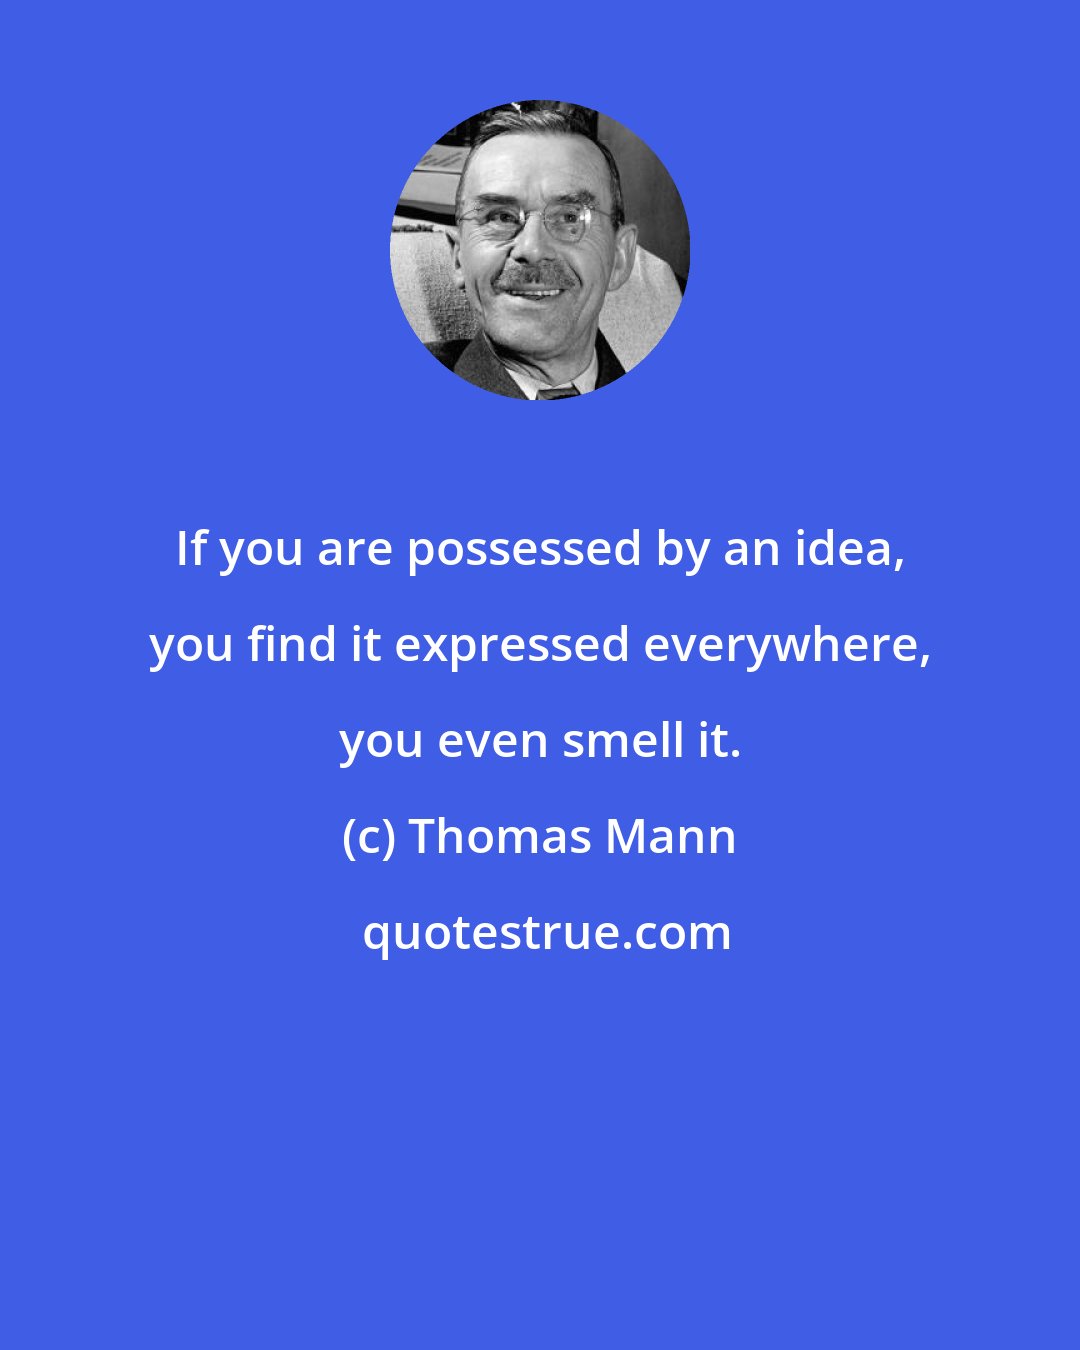 Thomas Mann: If you are possessed by an idea, you find it expressed everywhere, you even smell it.